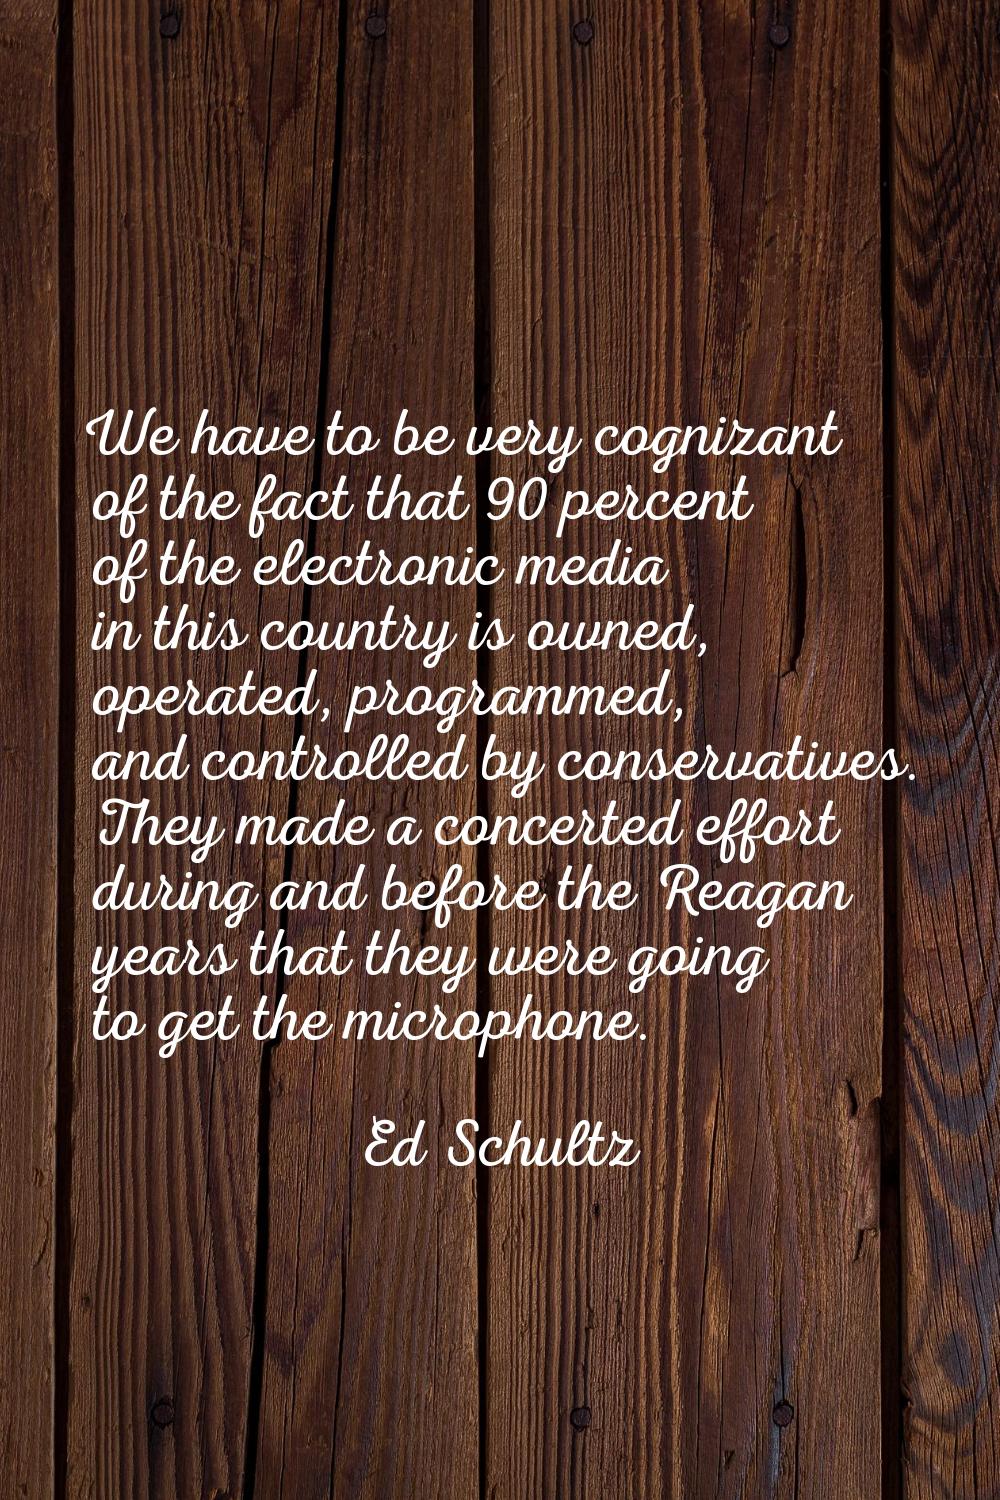 We have to be very cognizant of the fact that 90 percent of the electronic media in this country is